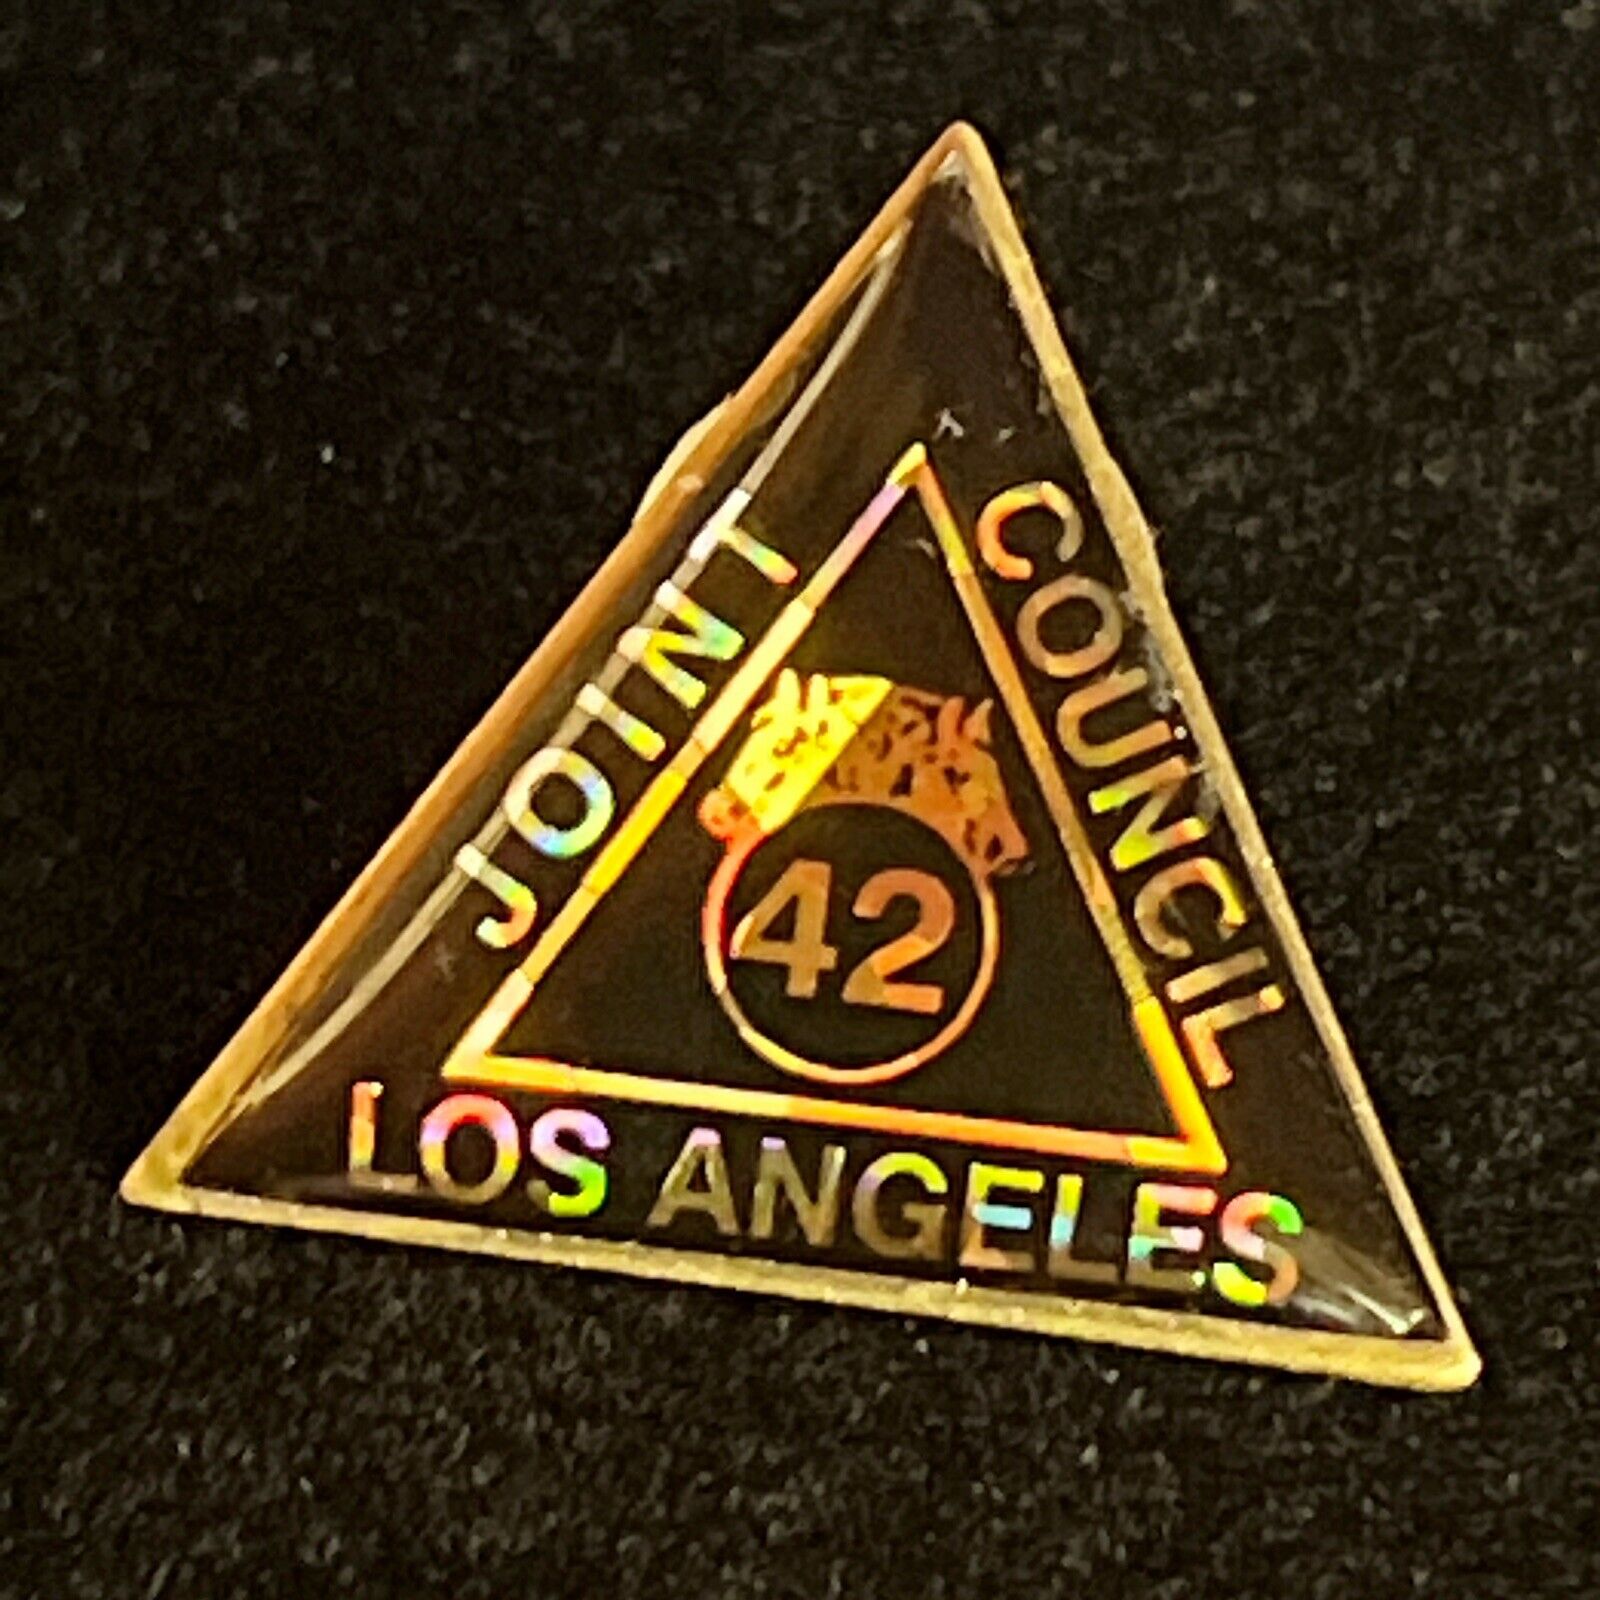 Vintage Holographic Teamsters Joint Council 42 Los Angeles Lapel Hat Pin 1